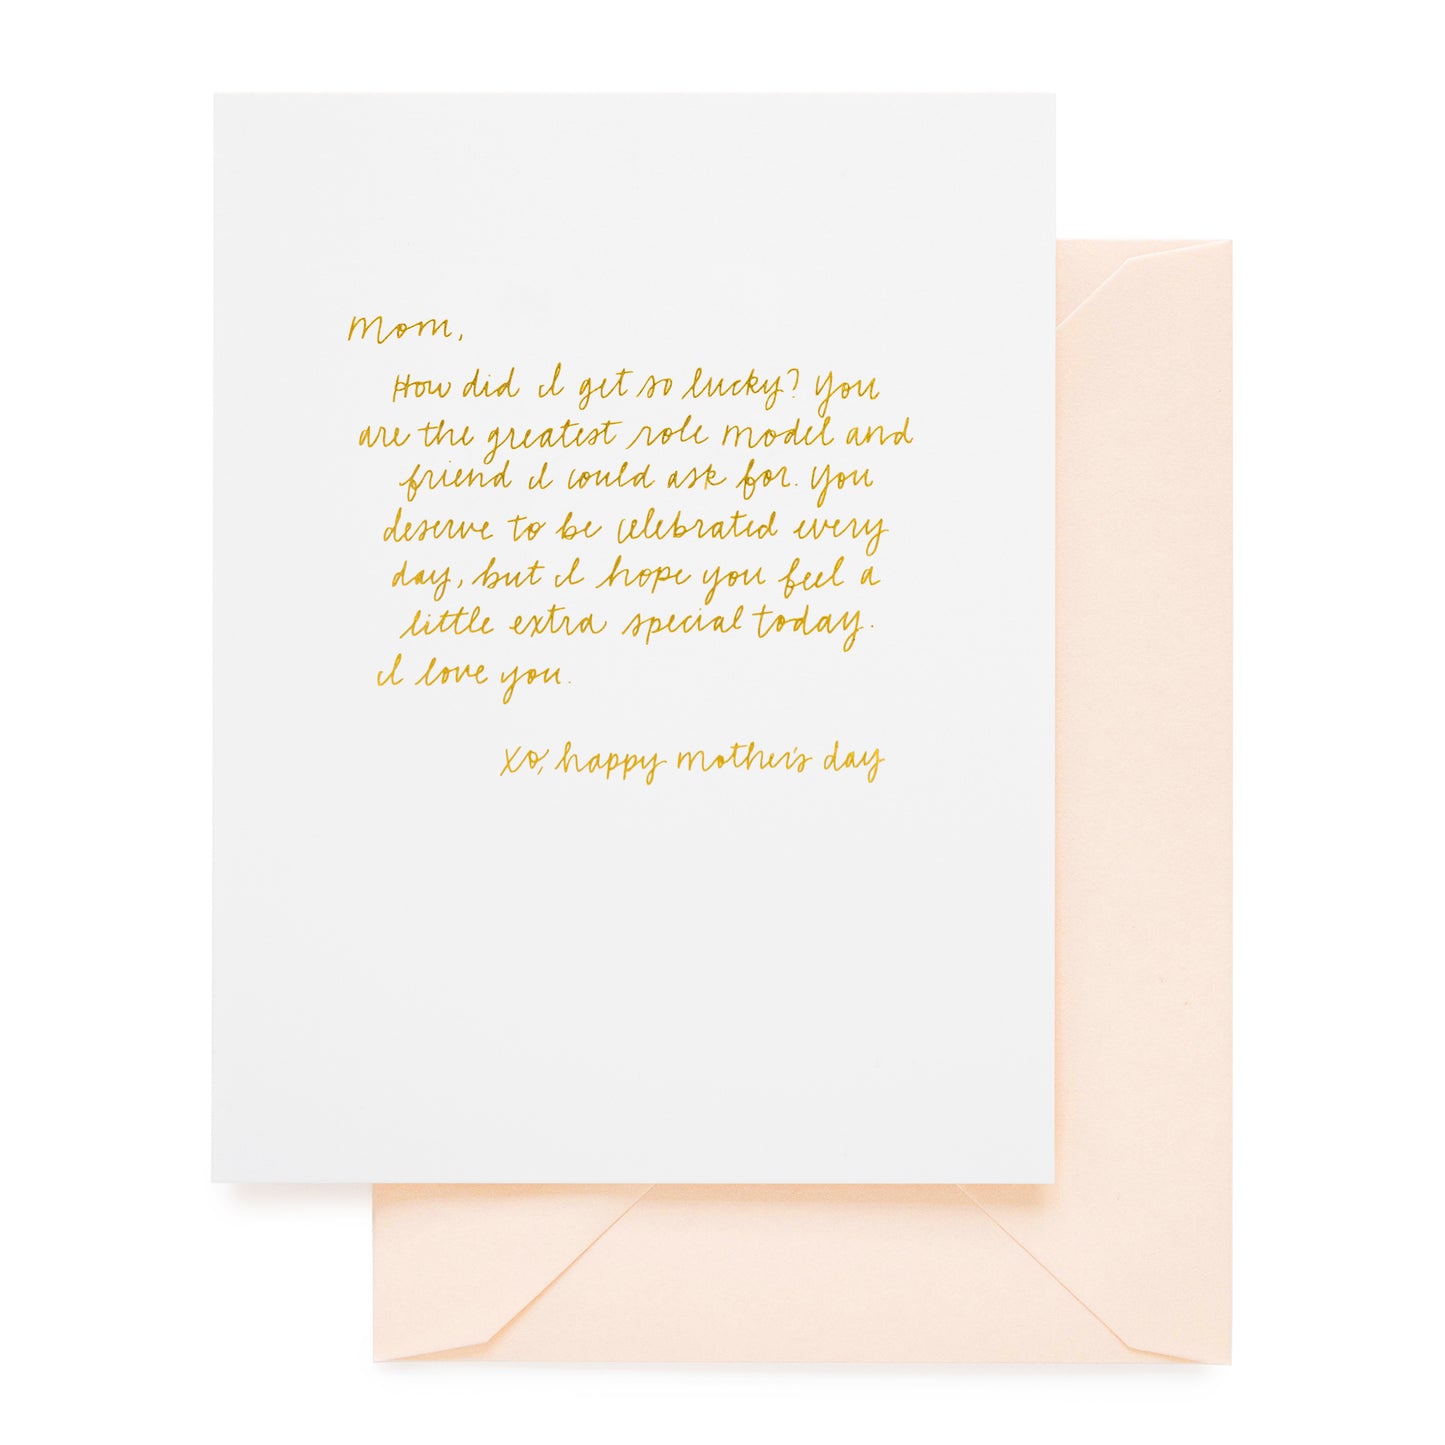 white card with gold text, pale pink envelope